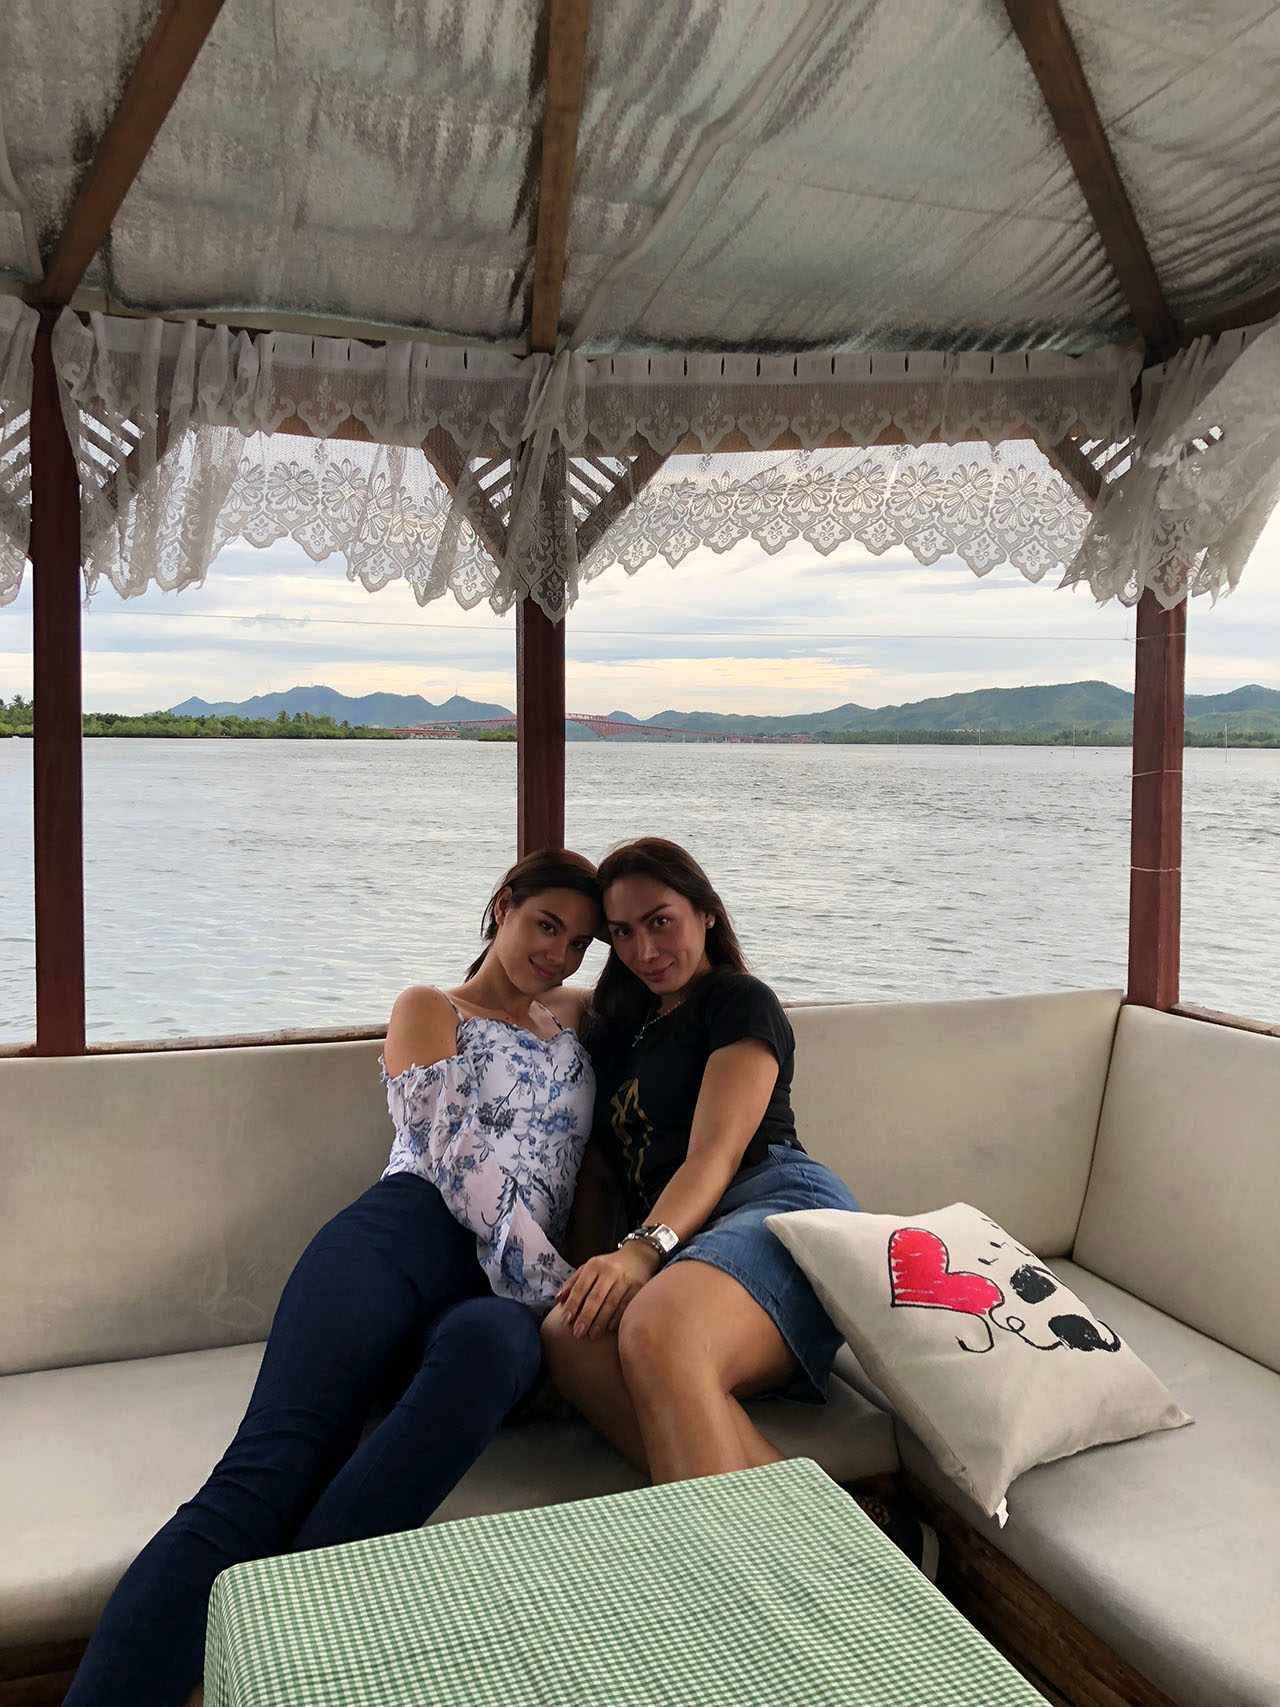 TIME OFF. Justine and Catriona take a break in one of their bonding moments. 